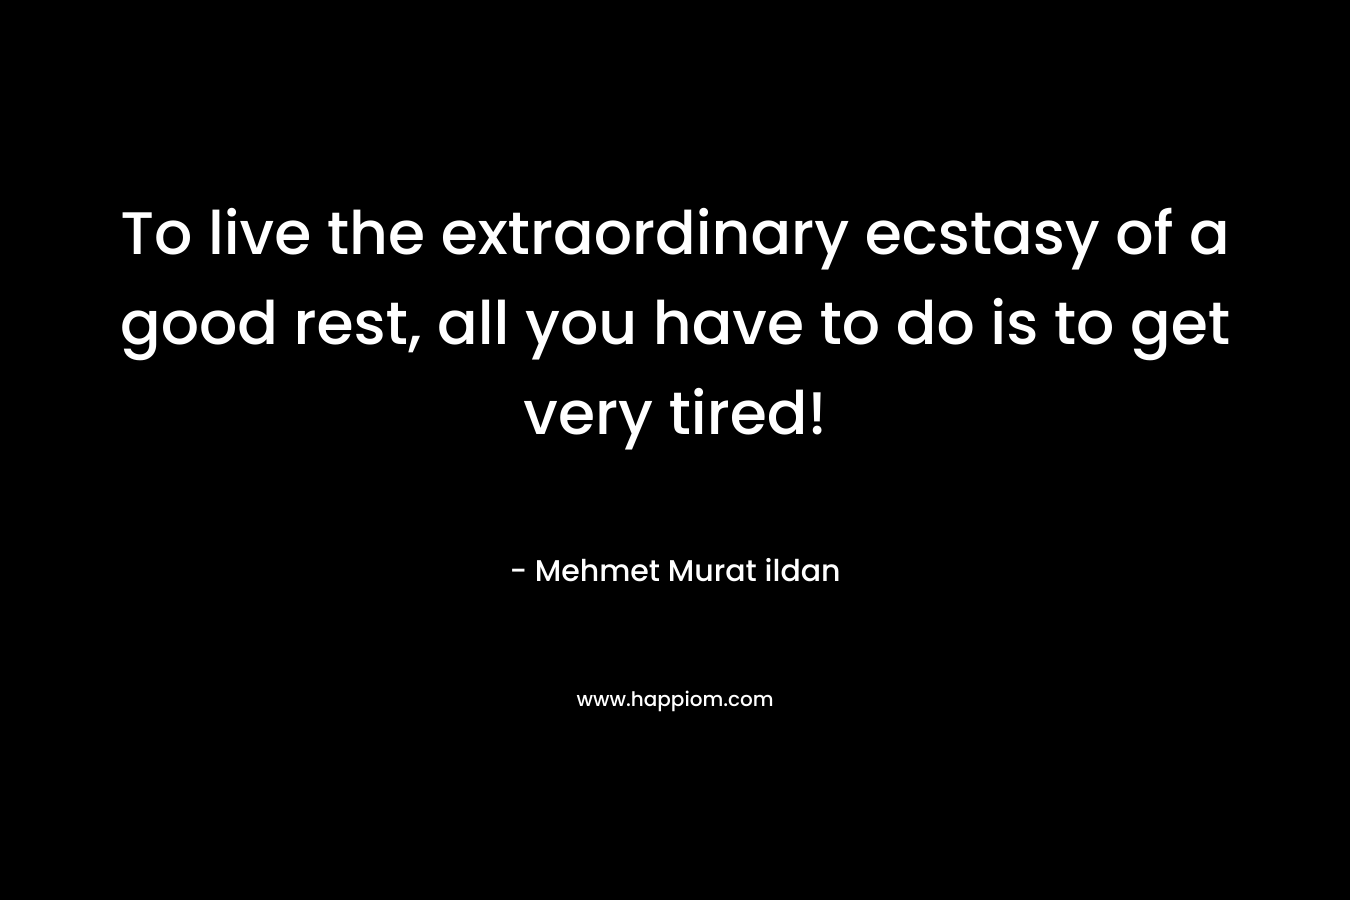 To live the extraordinary ecstasy of a good rest, all you have to do is to get very tired!